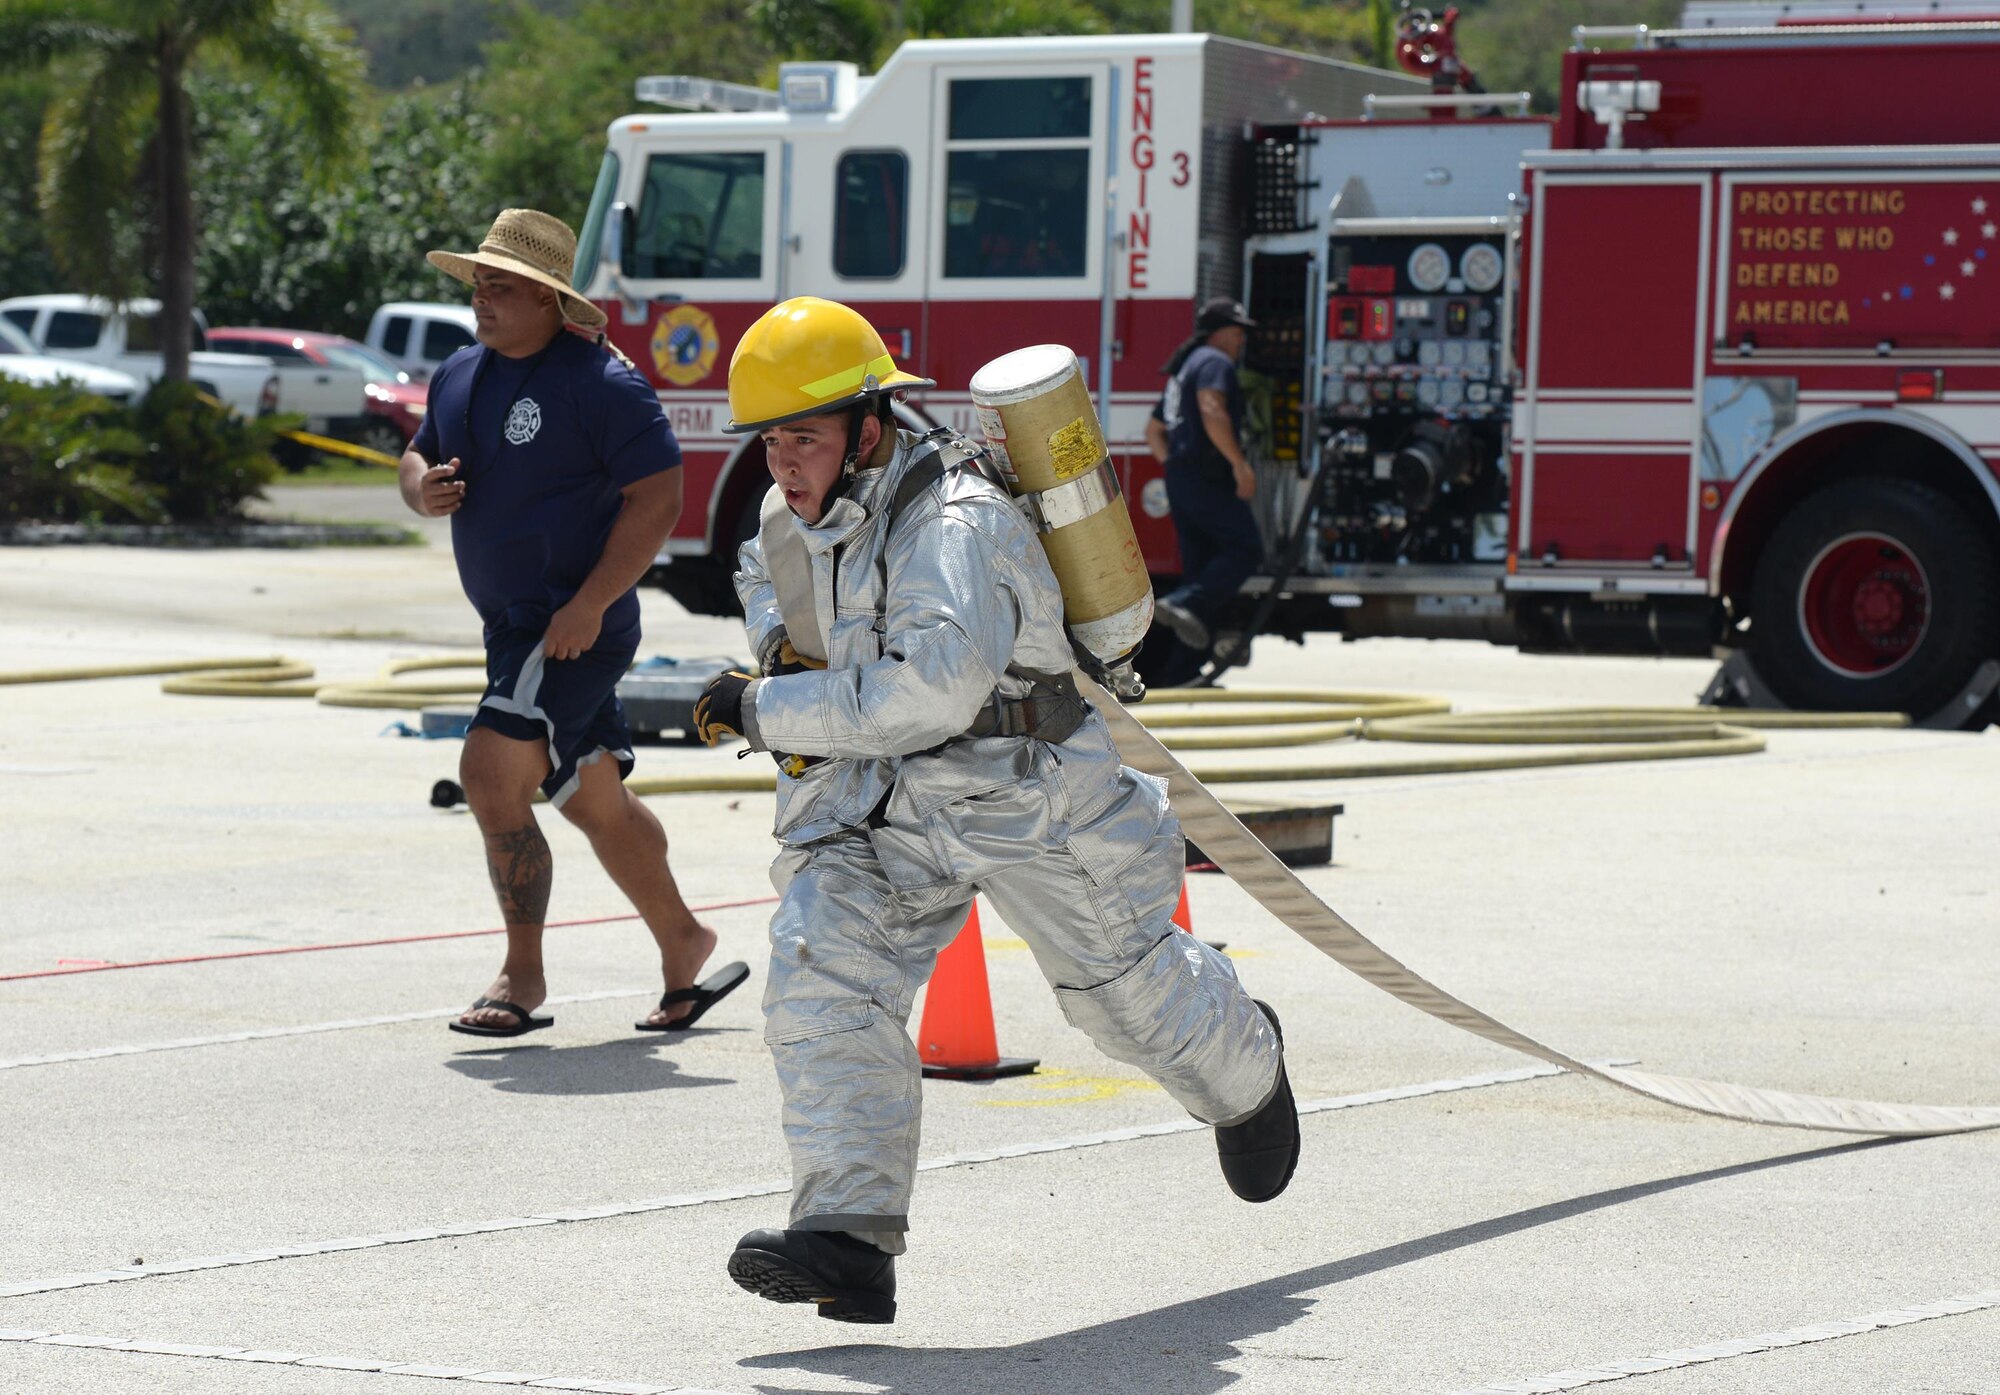 Airman 1st Class Jared May, 36th Civil Engineer Squadron fire protection crew chief, sprints with a hose during the annual Guam Fire Muster competition March 5, 2016, in Hagåtña, Guam. The fire muster tests a firefighter’s ability to perform basic firefighting techniques to include spraying a target with water, navigating through obstacles, carrying a casualty and using a sledgehammer. (U.S. Air Force photo/Staff Sgt. Benjamin Gonsier)